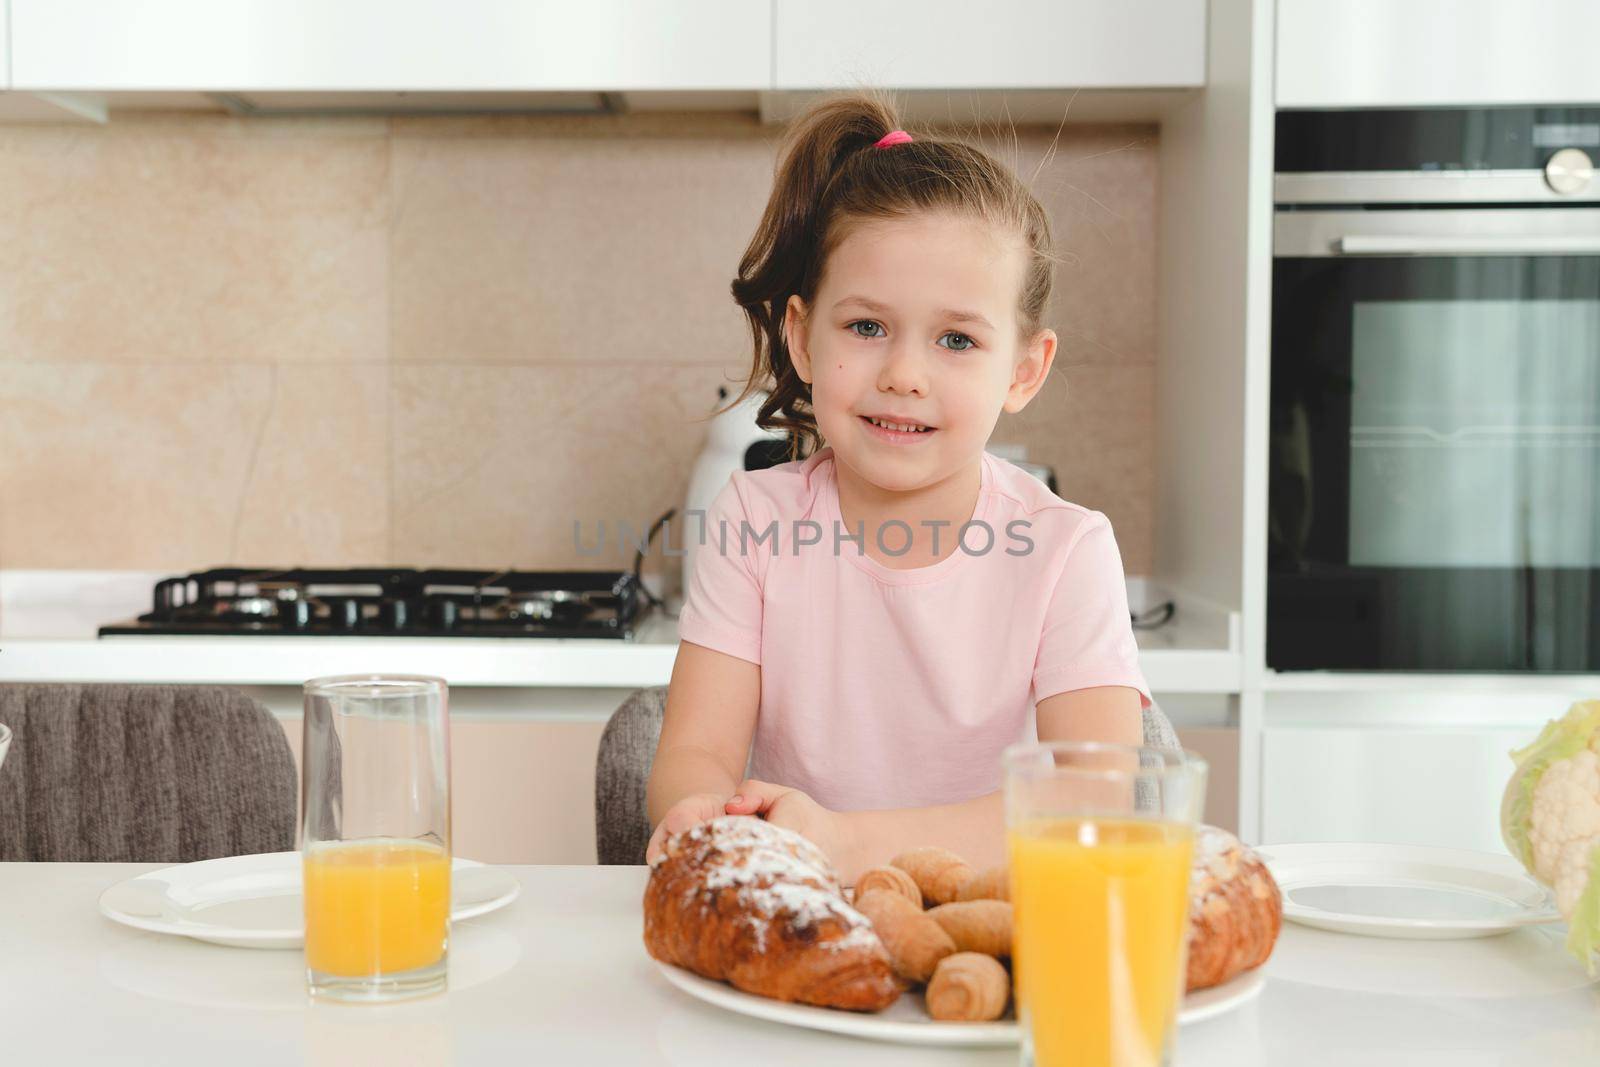 Pretty girl eating breakfast in the kitchen alone by Mariakray